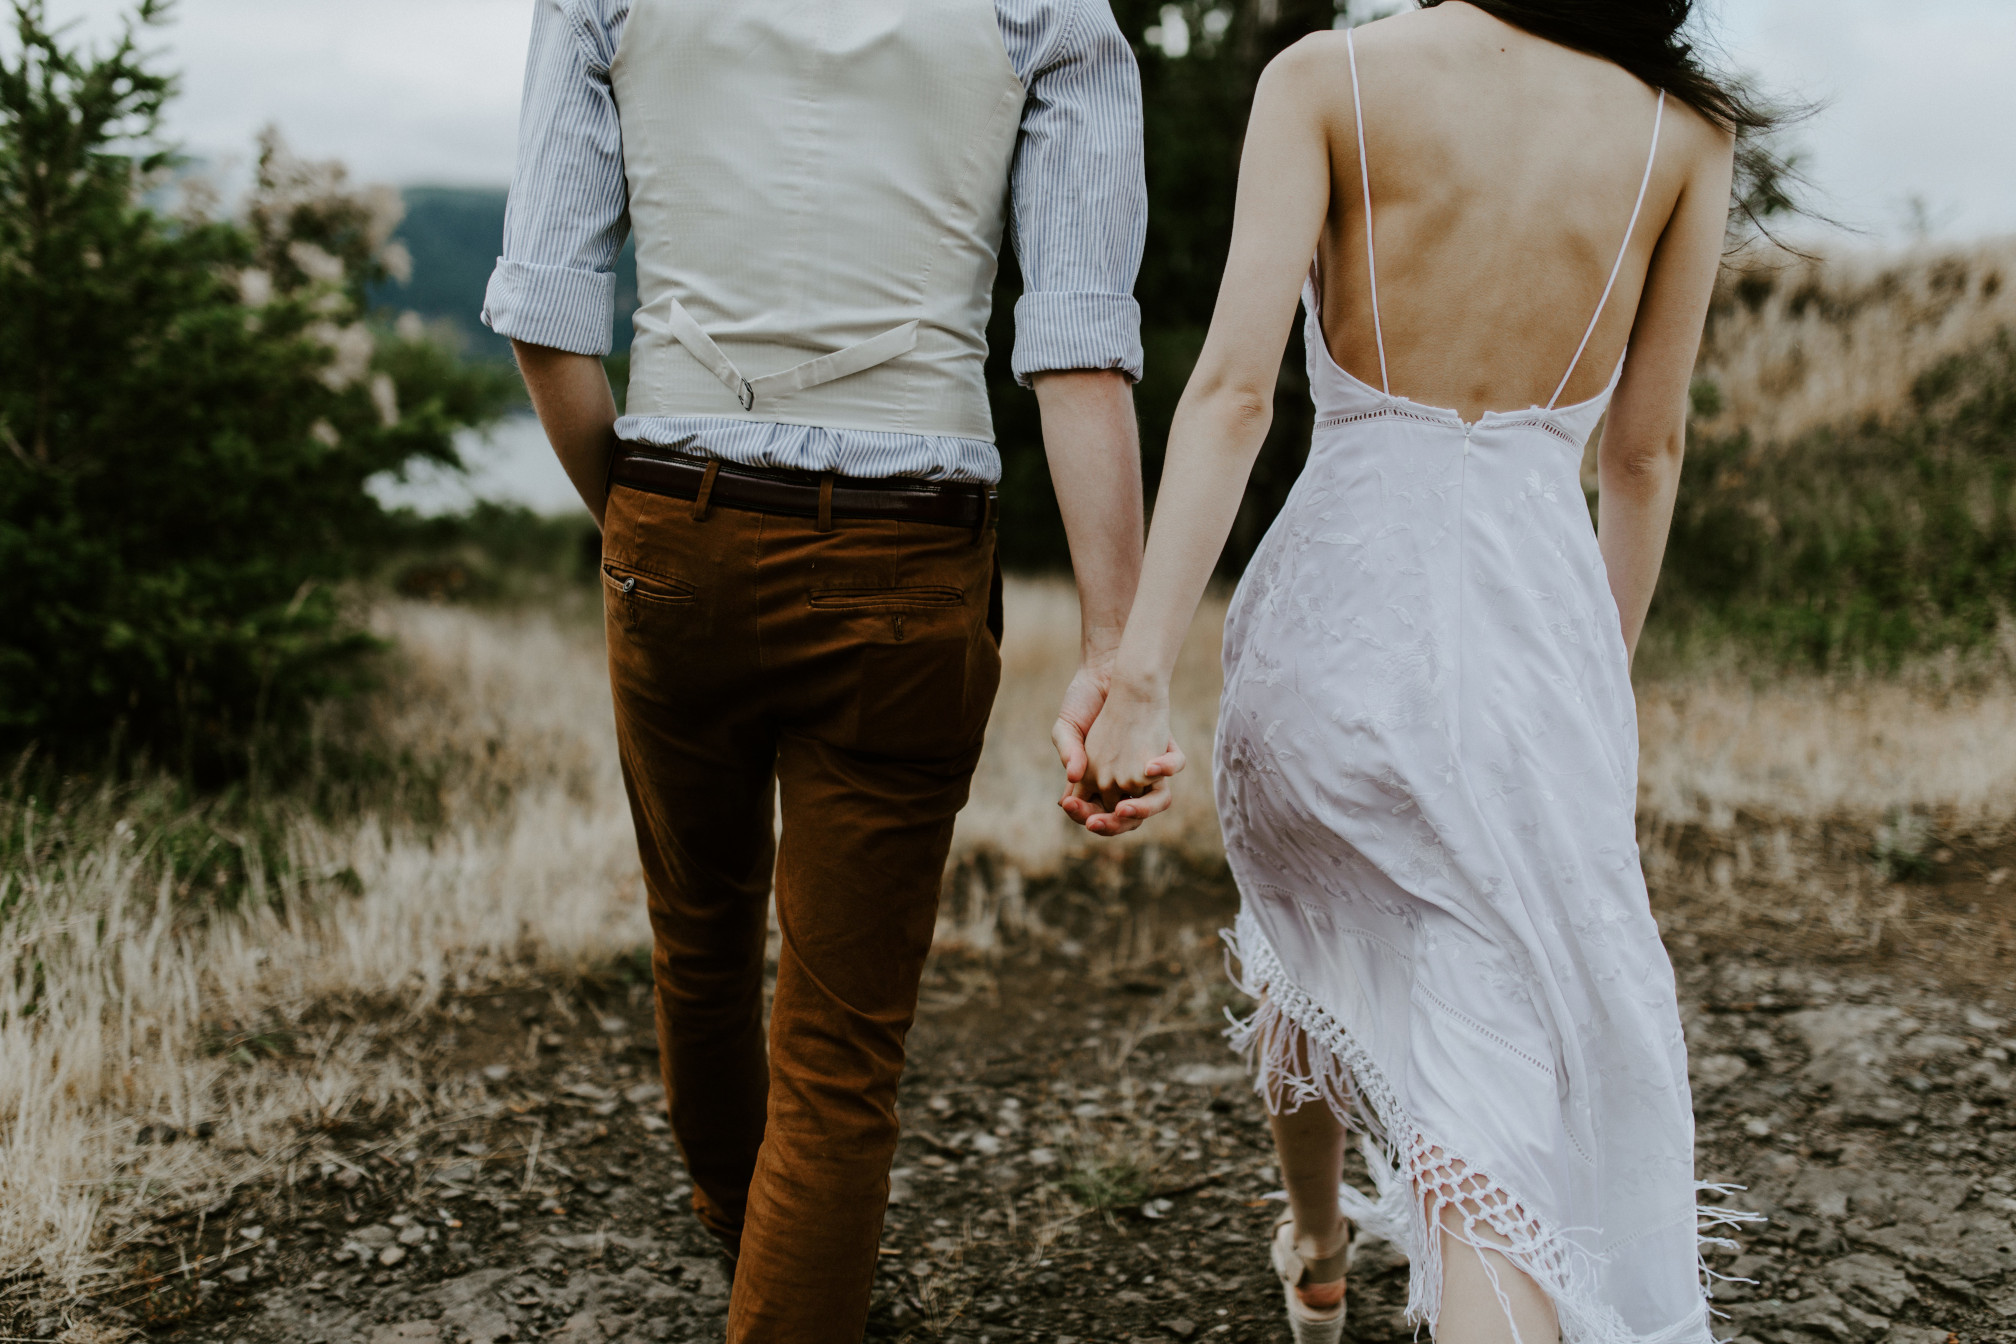 Jacob and Kimberlie walk hand in hand. Elopement wedding photography at Cascade Locks by Sienna Plus Josh.